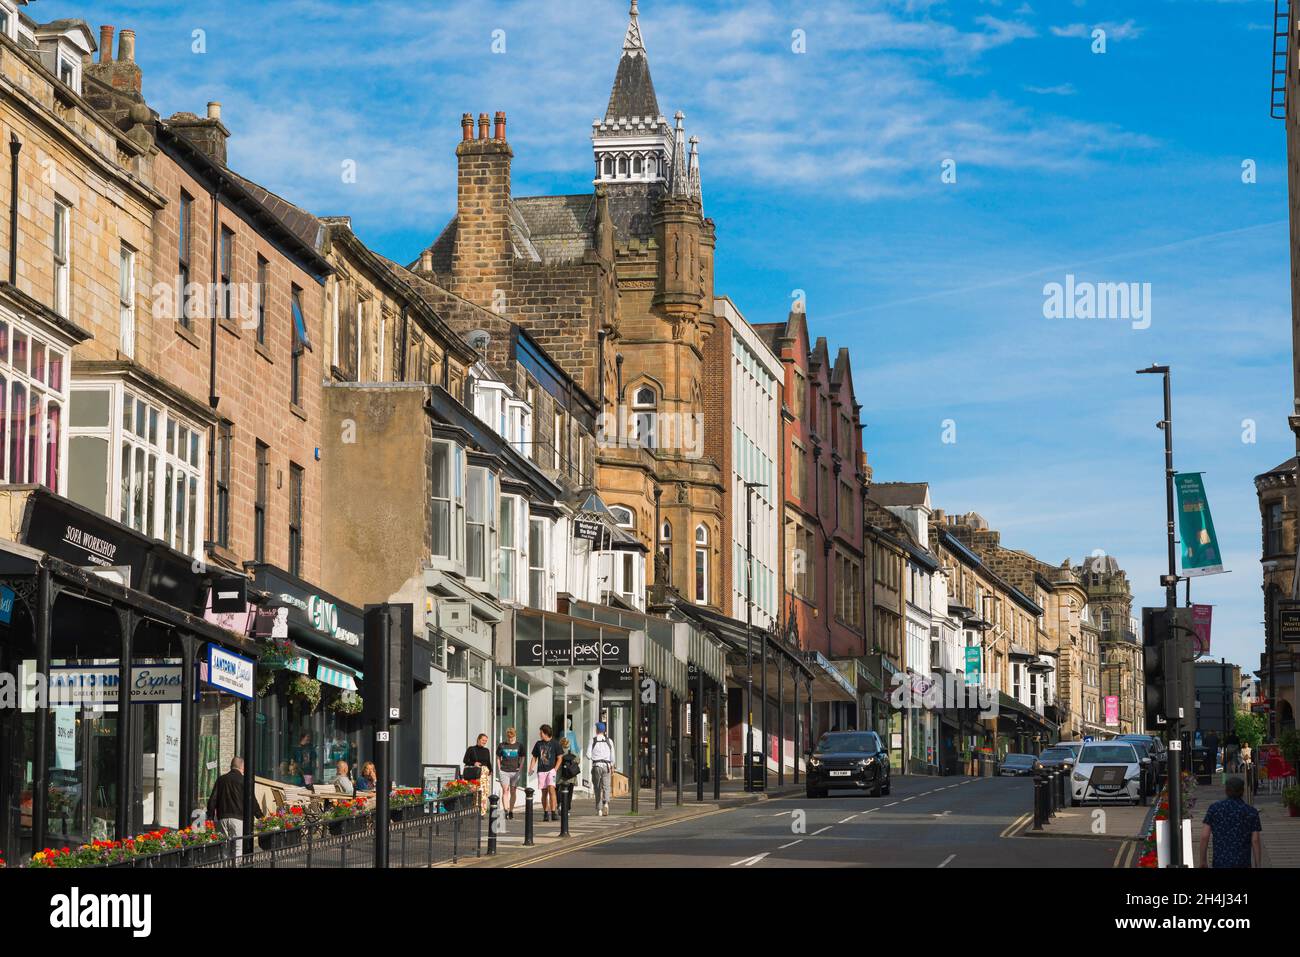 Harrogate, view of Parliament Street, the main shopping thoroughfare running through the centre of Harrogate, North Yorkshire, England, UK Stock Photo